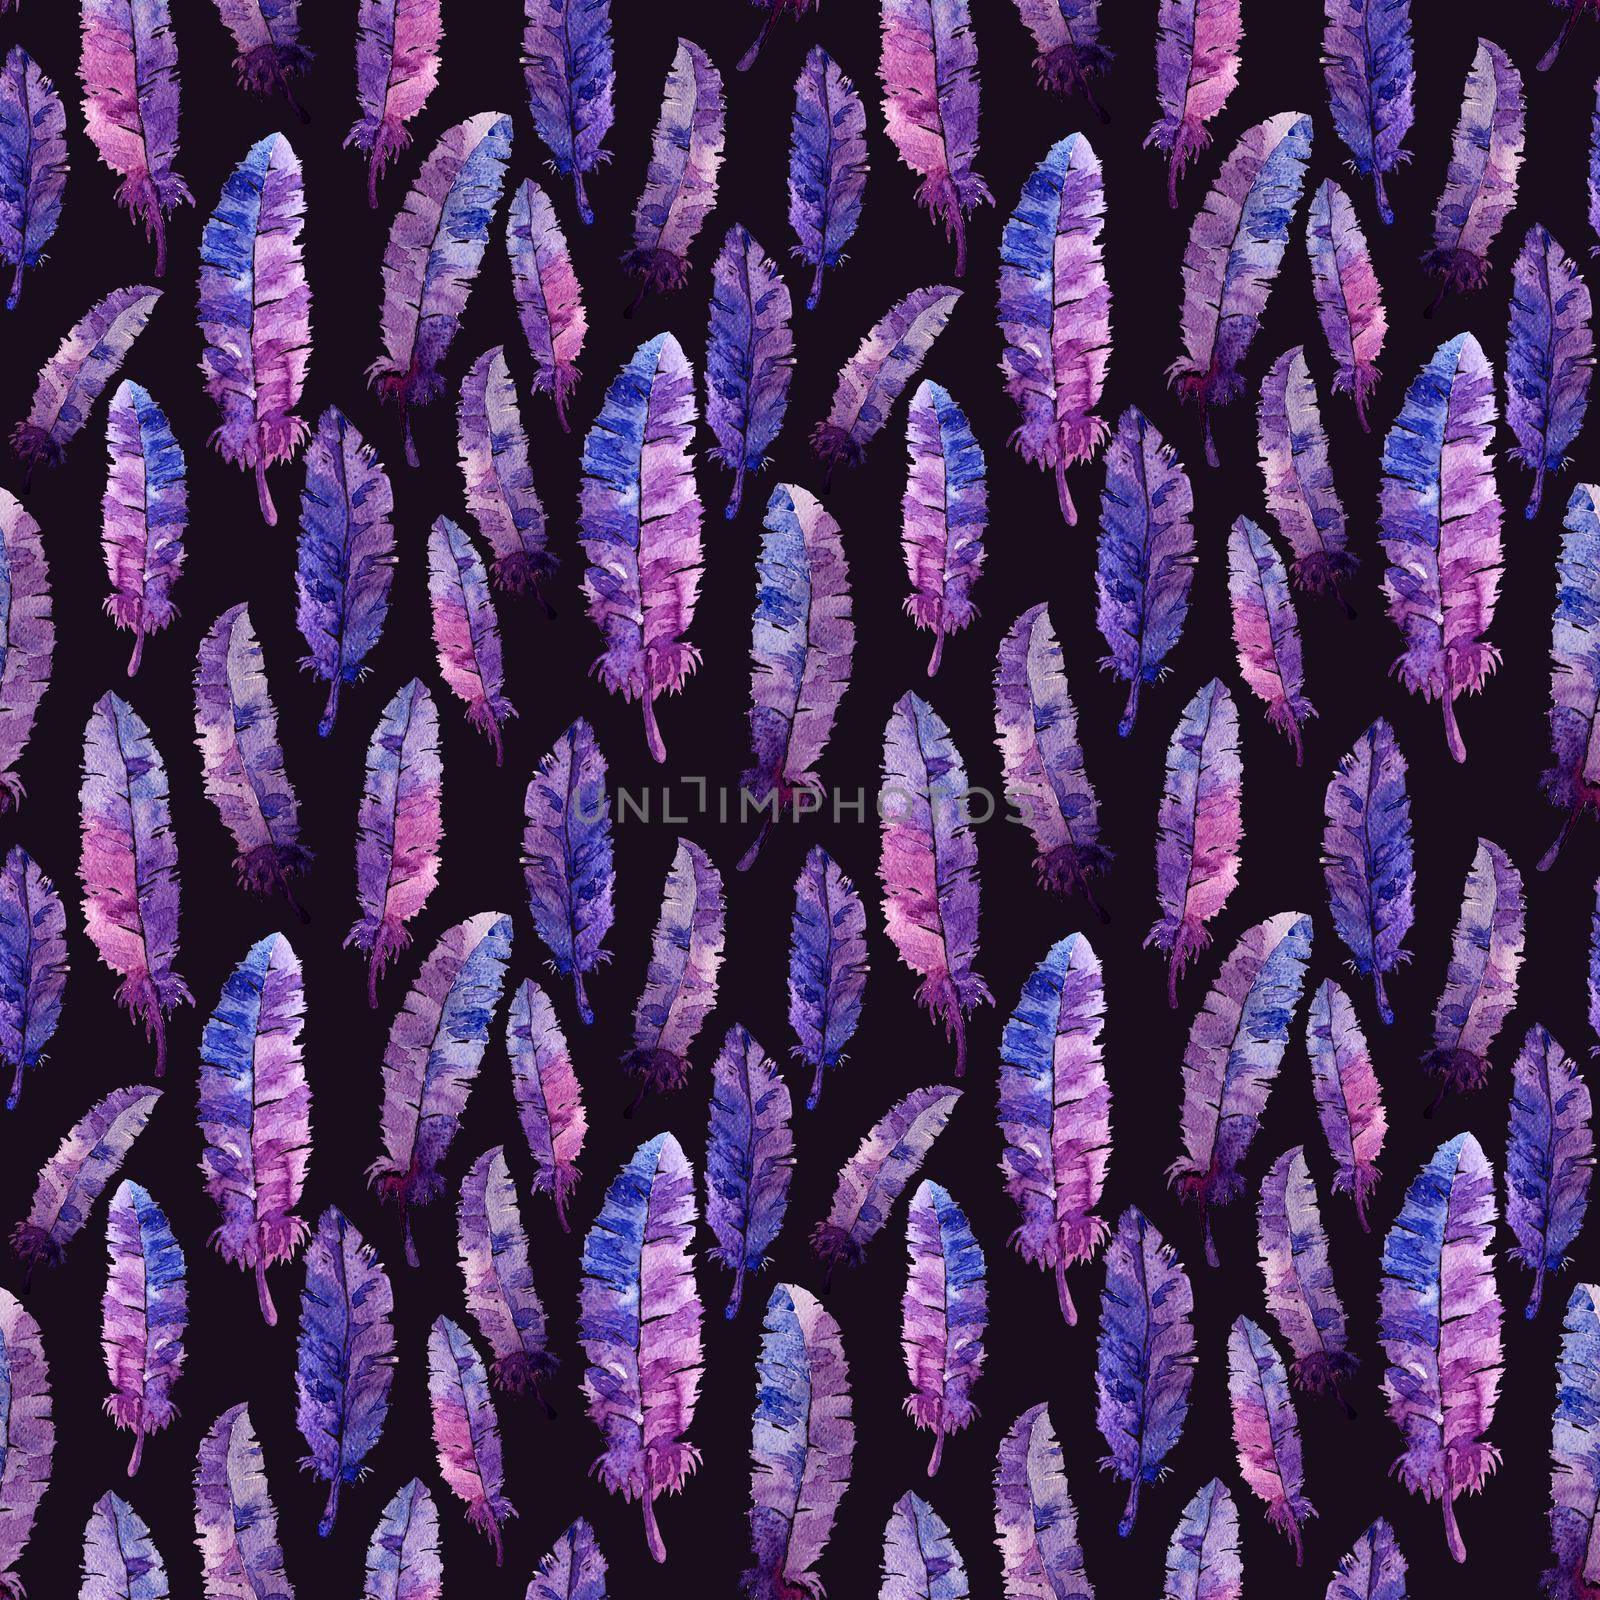 Watercolor feathers seamless pattern. Colorful feathers with watercolor texture pattern. Violet background